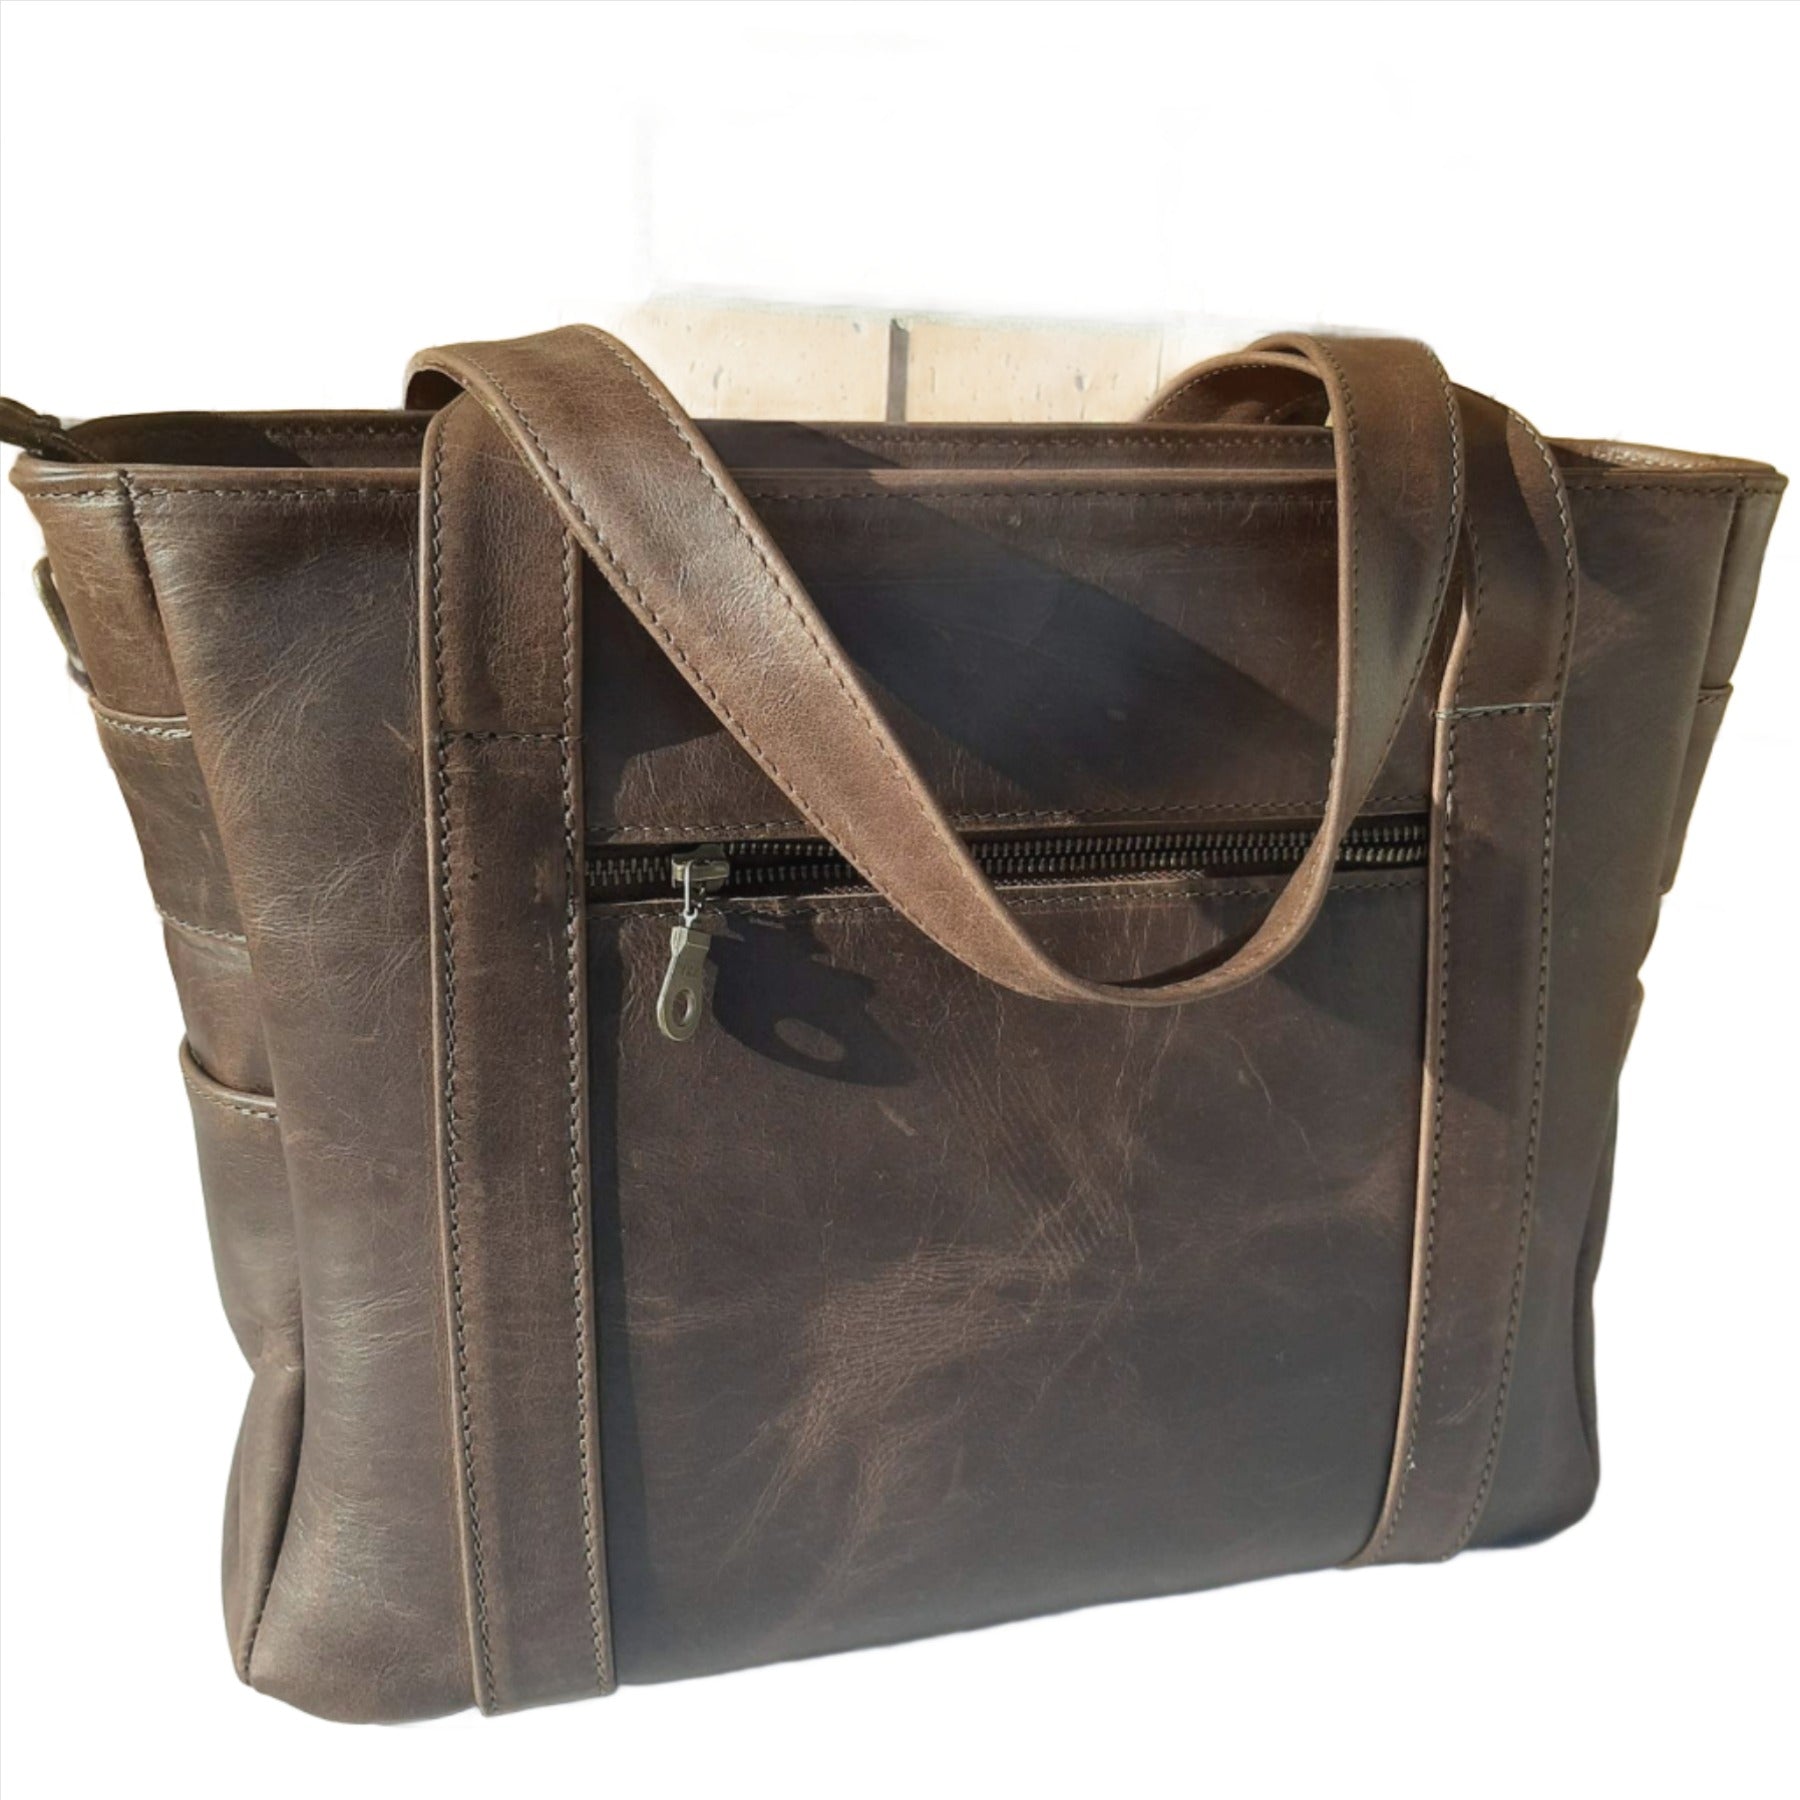 Laptop bags in Diesel Pitstop Rust colour made in Cape Town by Cape Masai leather